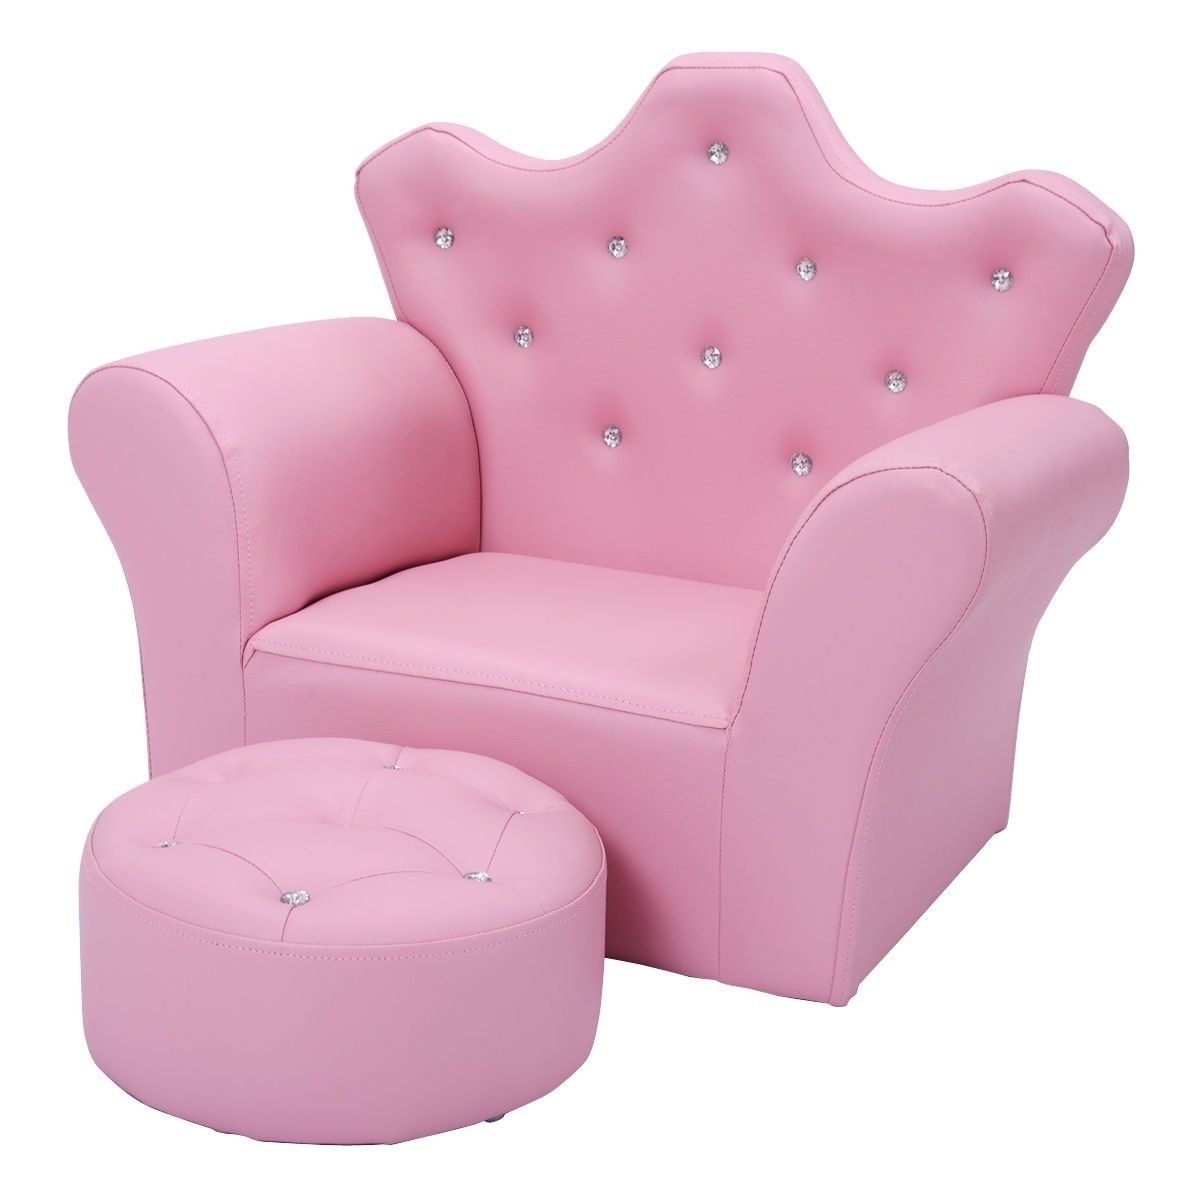 Fashionable Childrens Sofas With Amazon: Costzon Kids Sofa Chair With Ottoman Children (Photo 7 of 15)